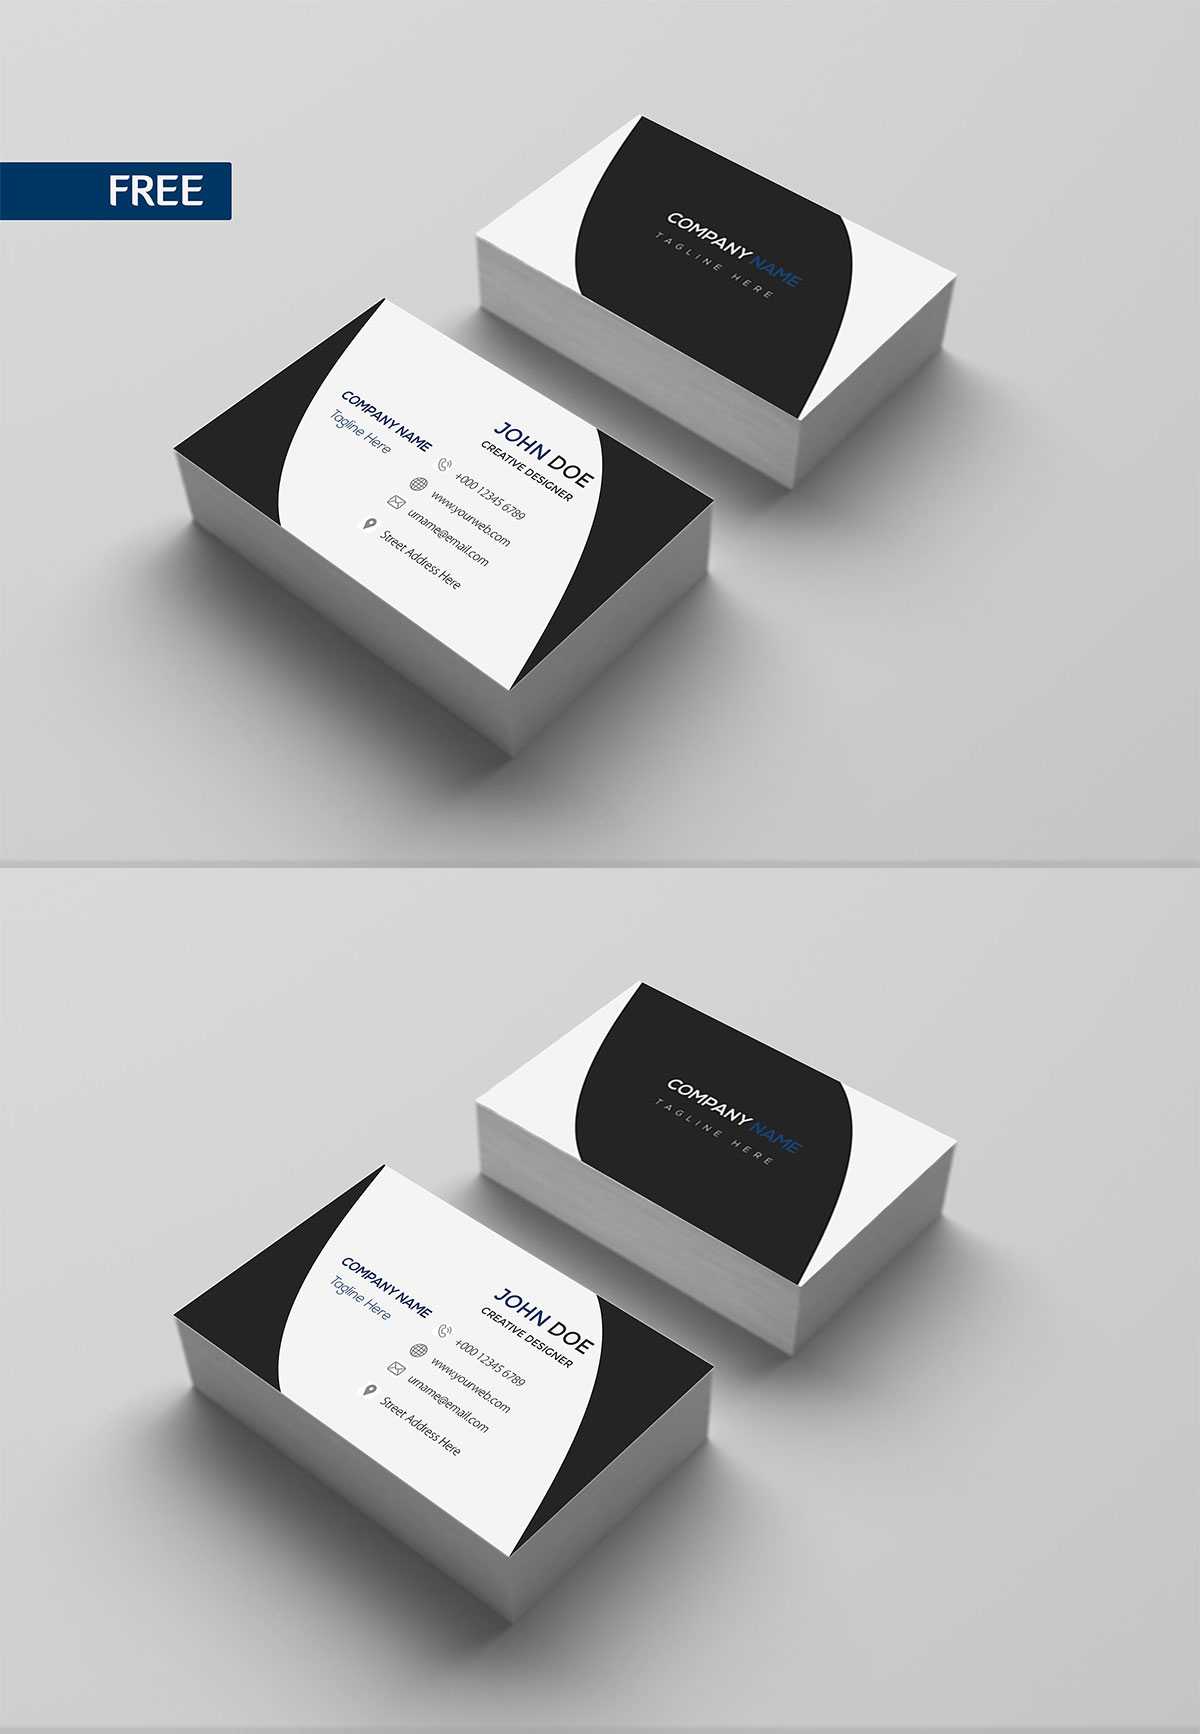 Free Print Design Business Card Template – Creativetacos With Regard To Free Bussiness Card Template